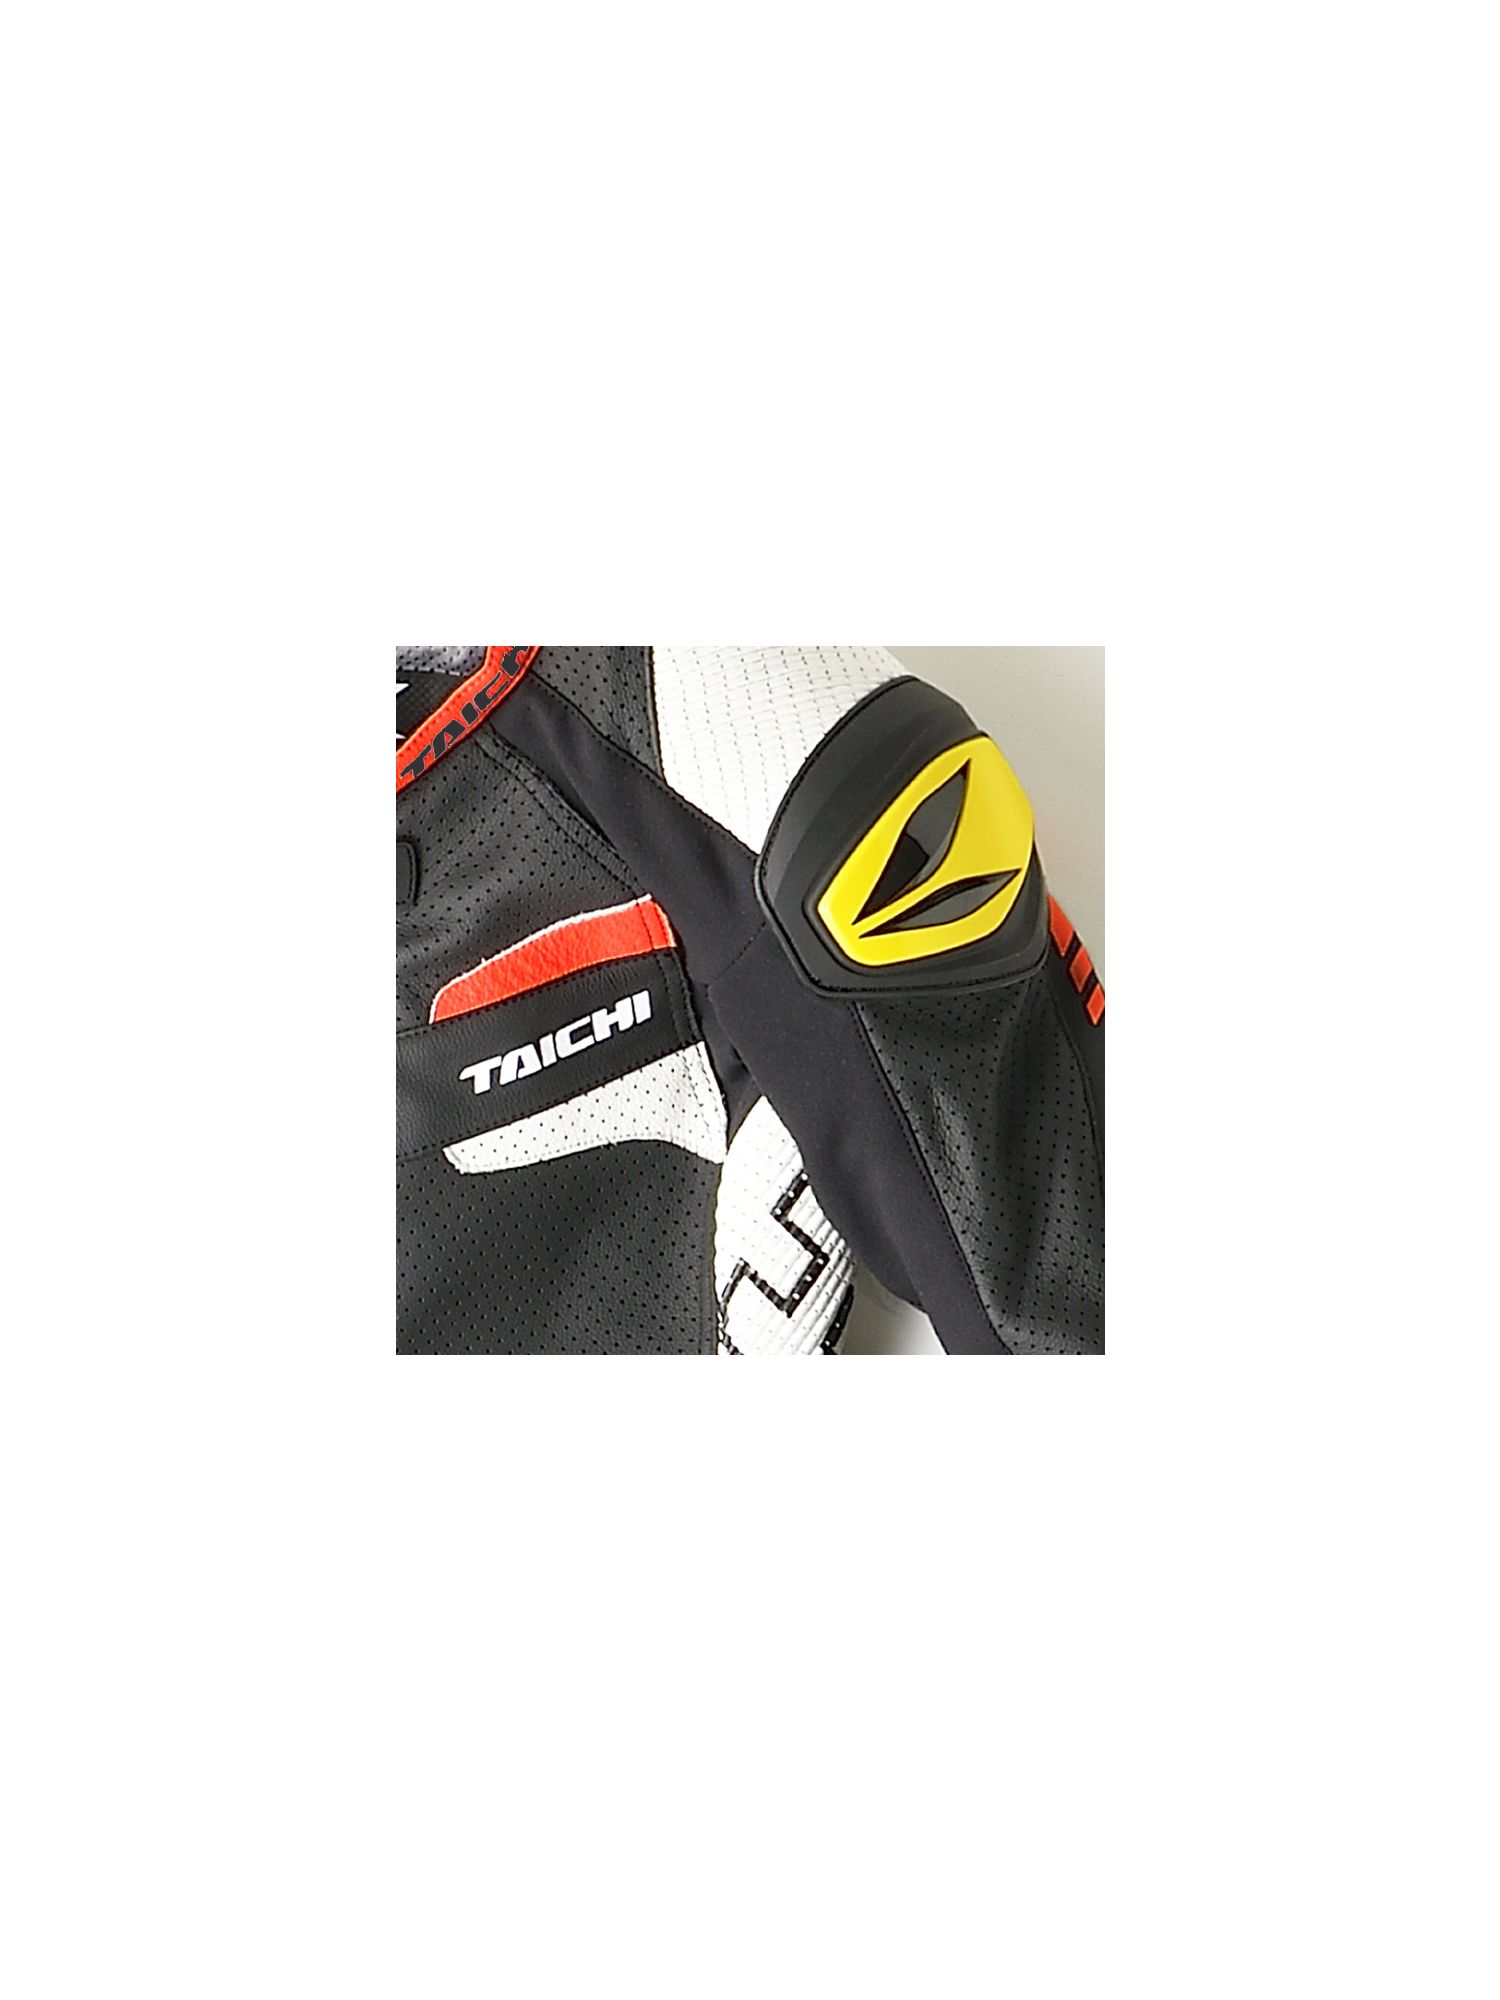 NXL306 | GP-WRX R306 RACING SUIT FOR TECH-AIR®［2colors］